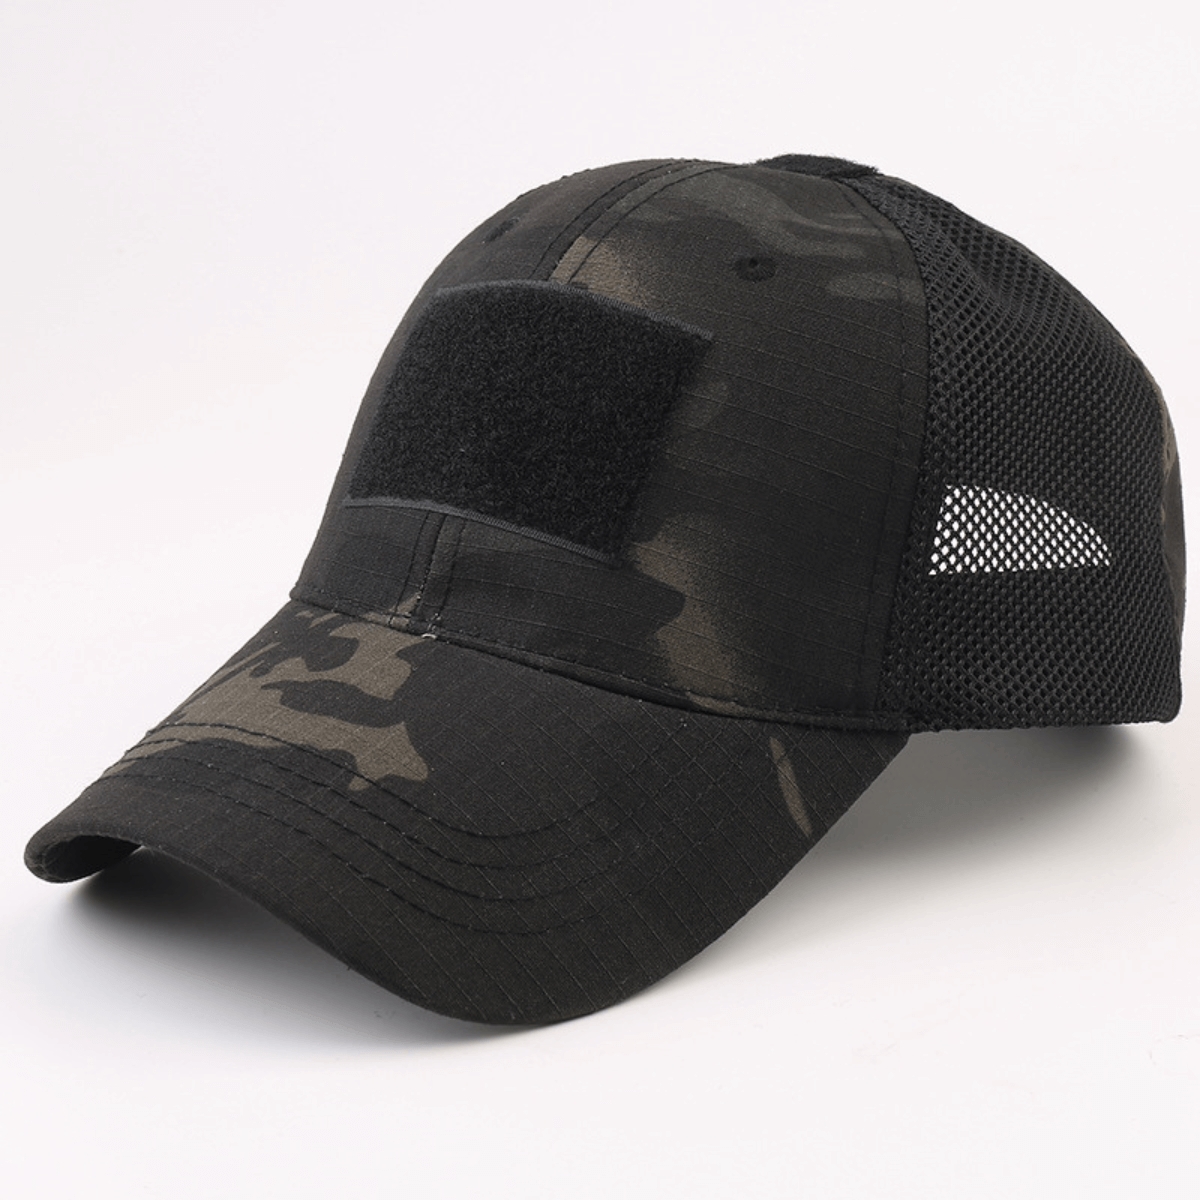 Picture of JupiterGear JG-HAT2-BLKCAMO Military-Style Tactical Patch Hat with Adjustable Strap (JG-HAT2) Black Camo